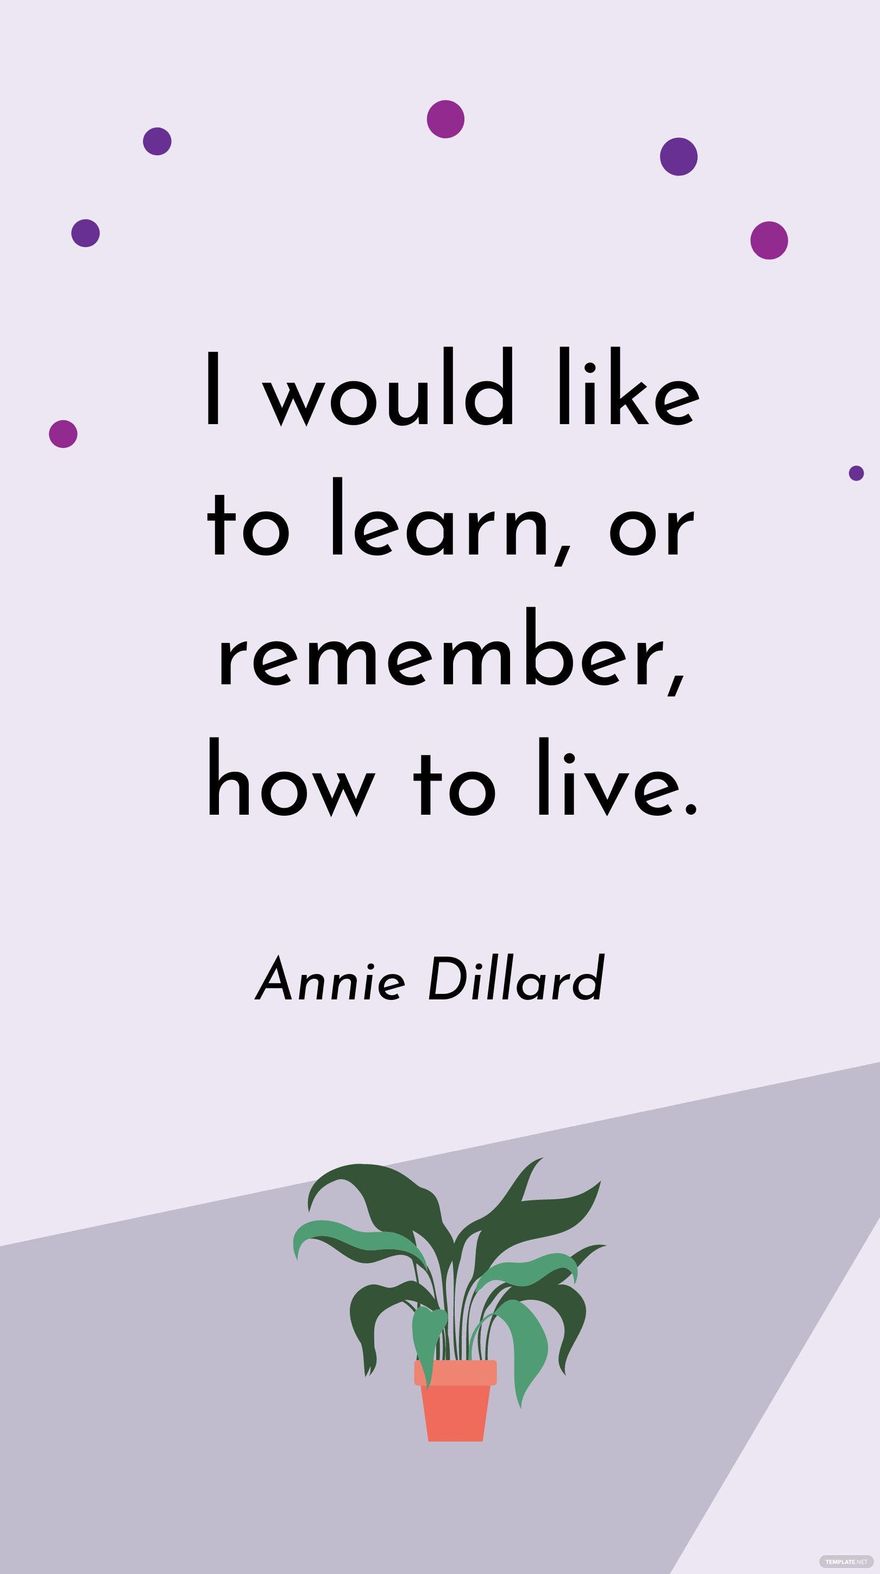 Free Annie Dillard - I would like to learn, or remember, how to live.